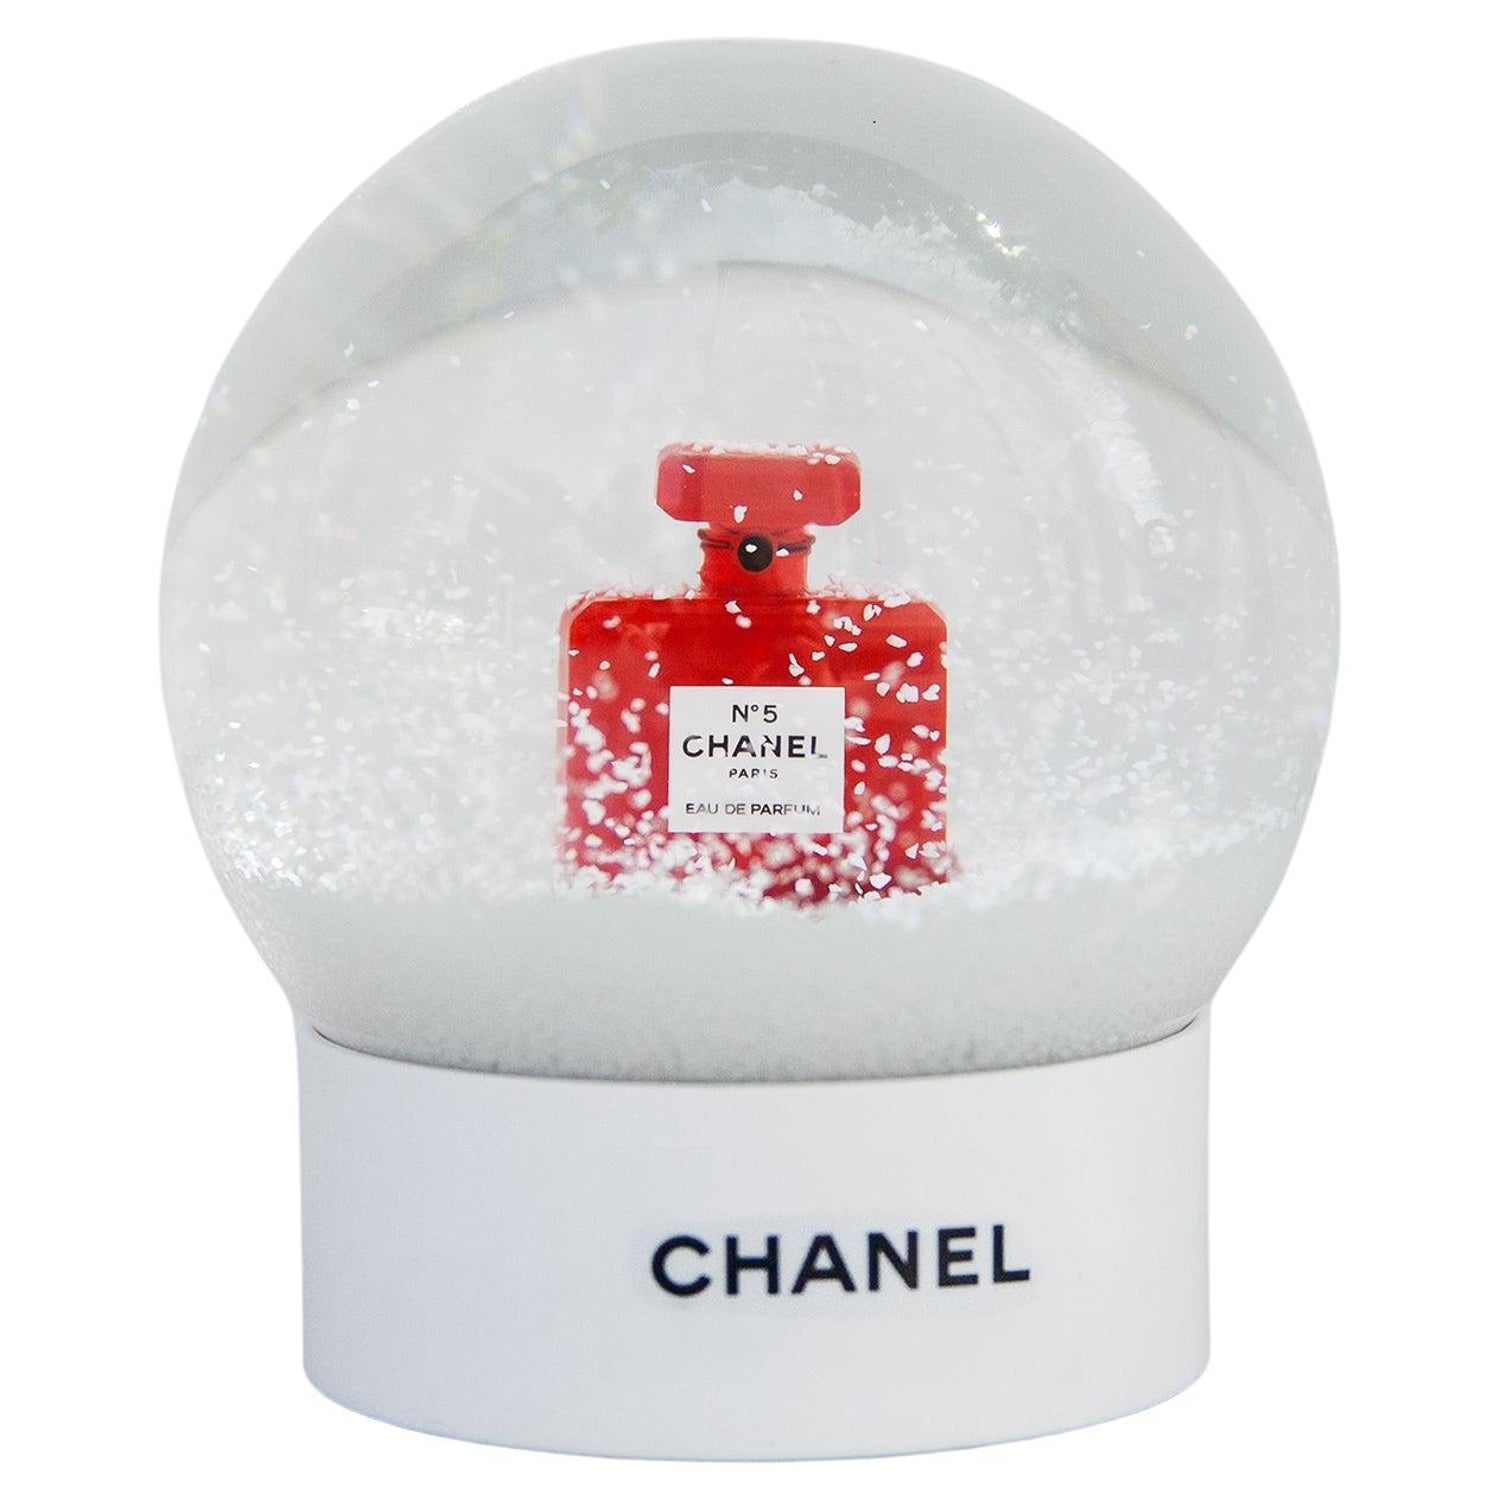 Chanel Snow Globe Dome Chanel VIP Collectible Large Perfume N